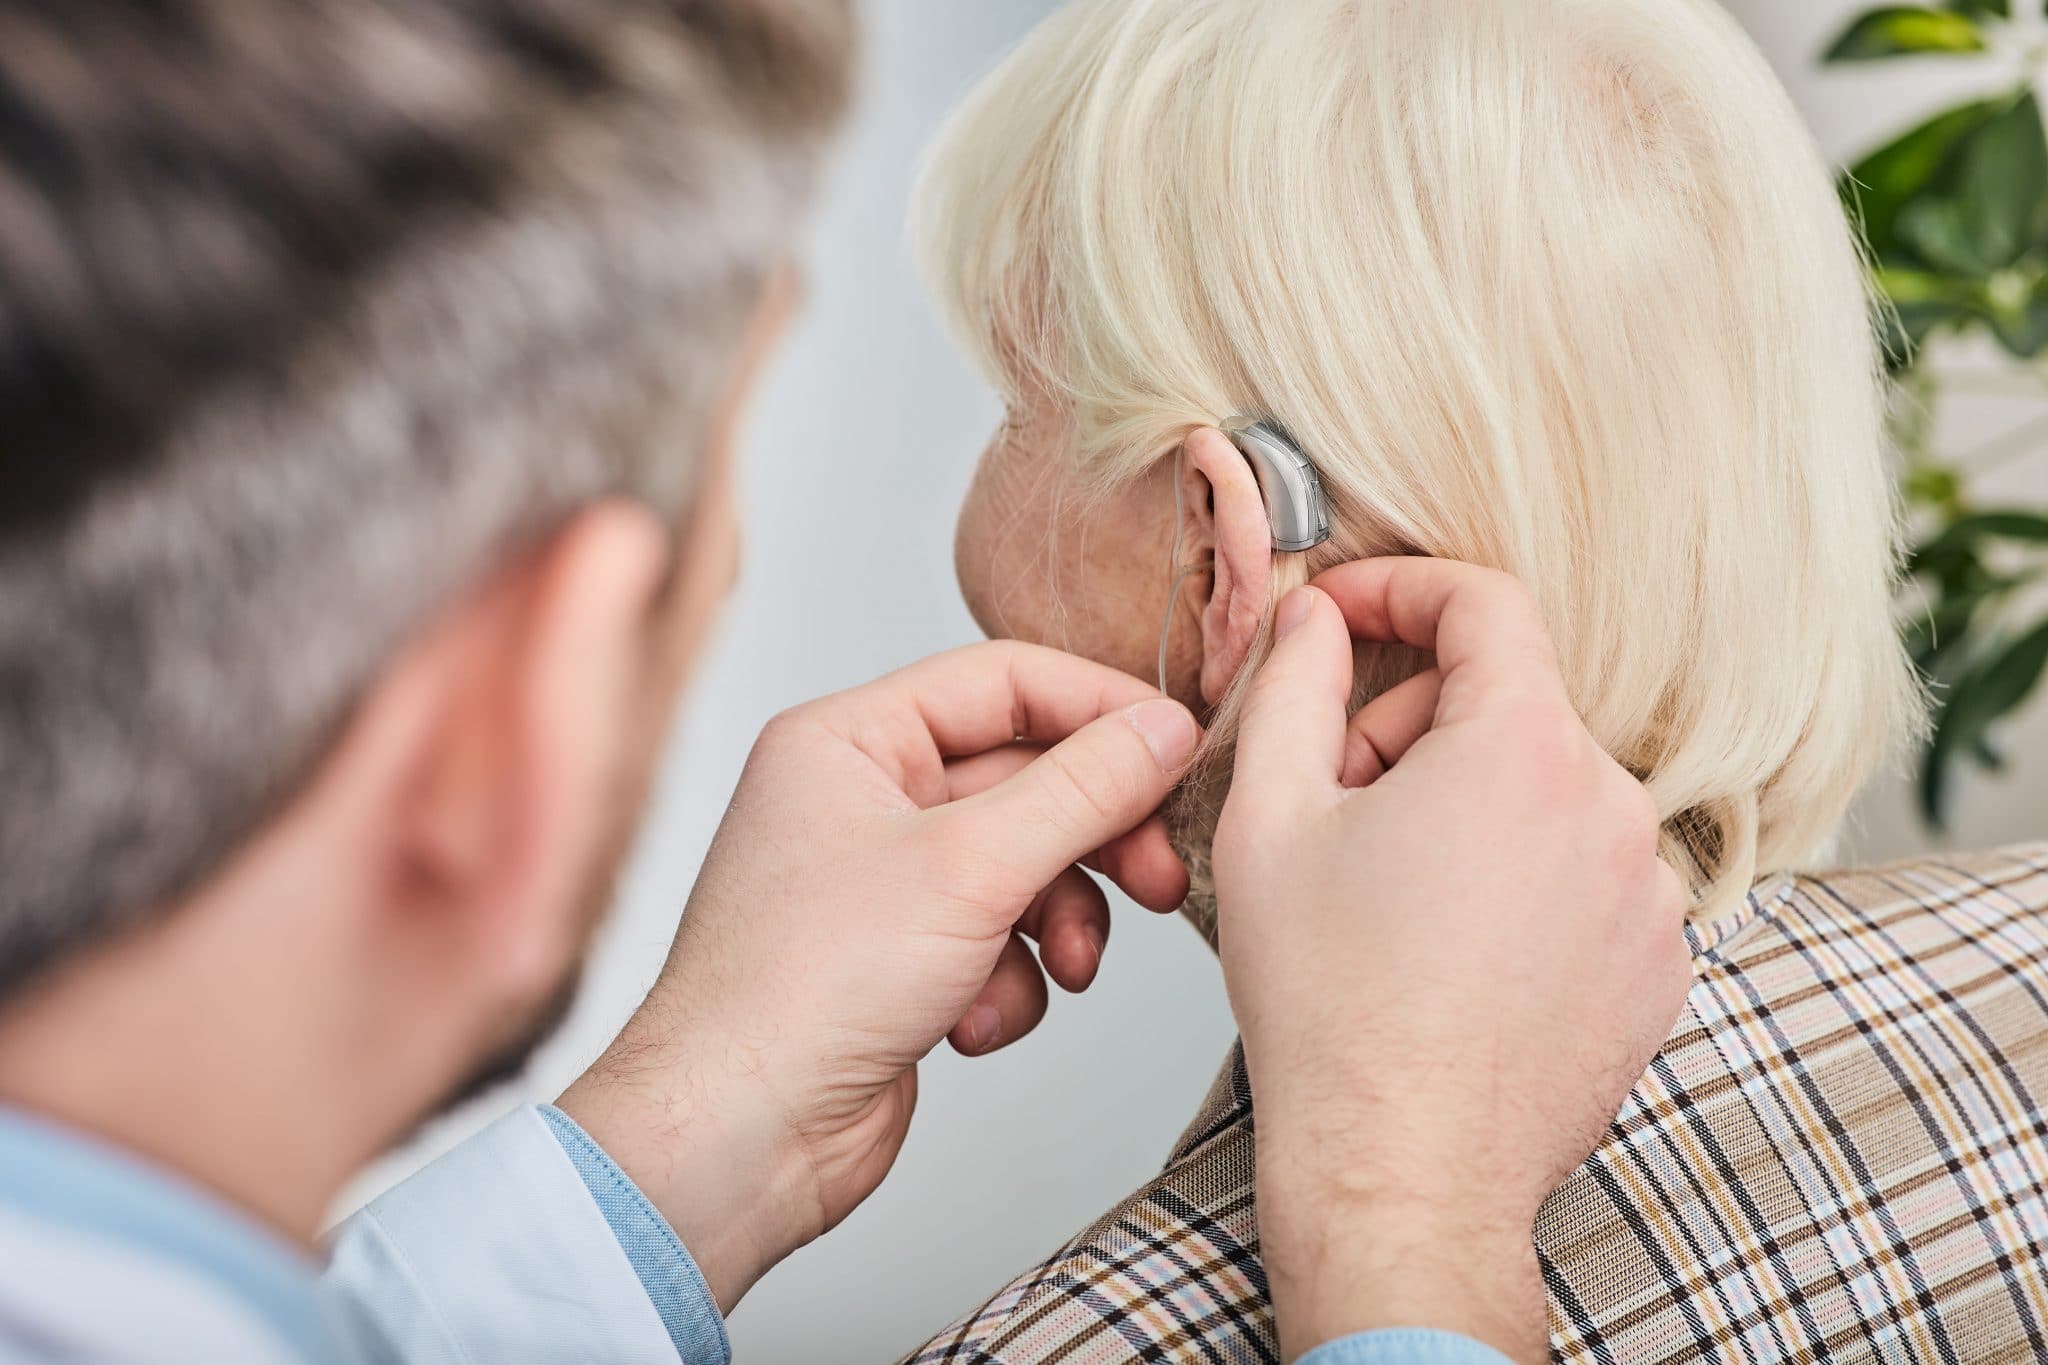 Audiologist helping to fit hearing aid on to woman's ear.